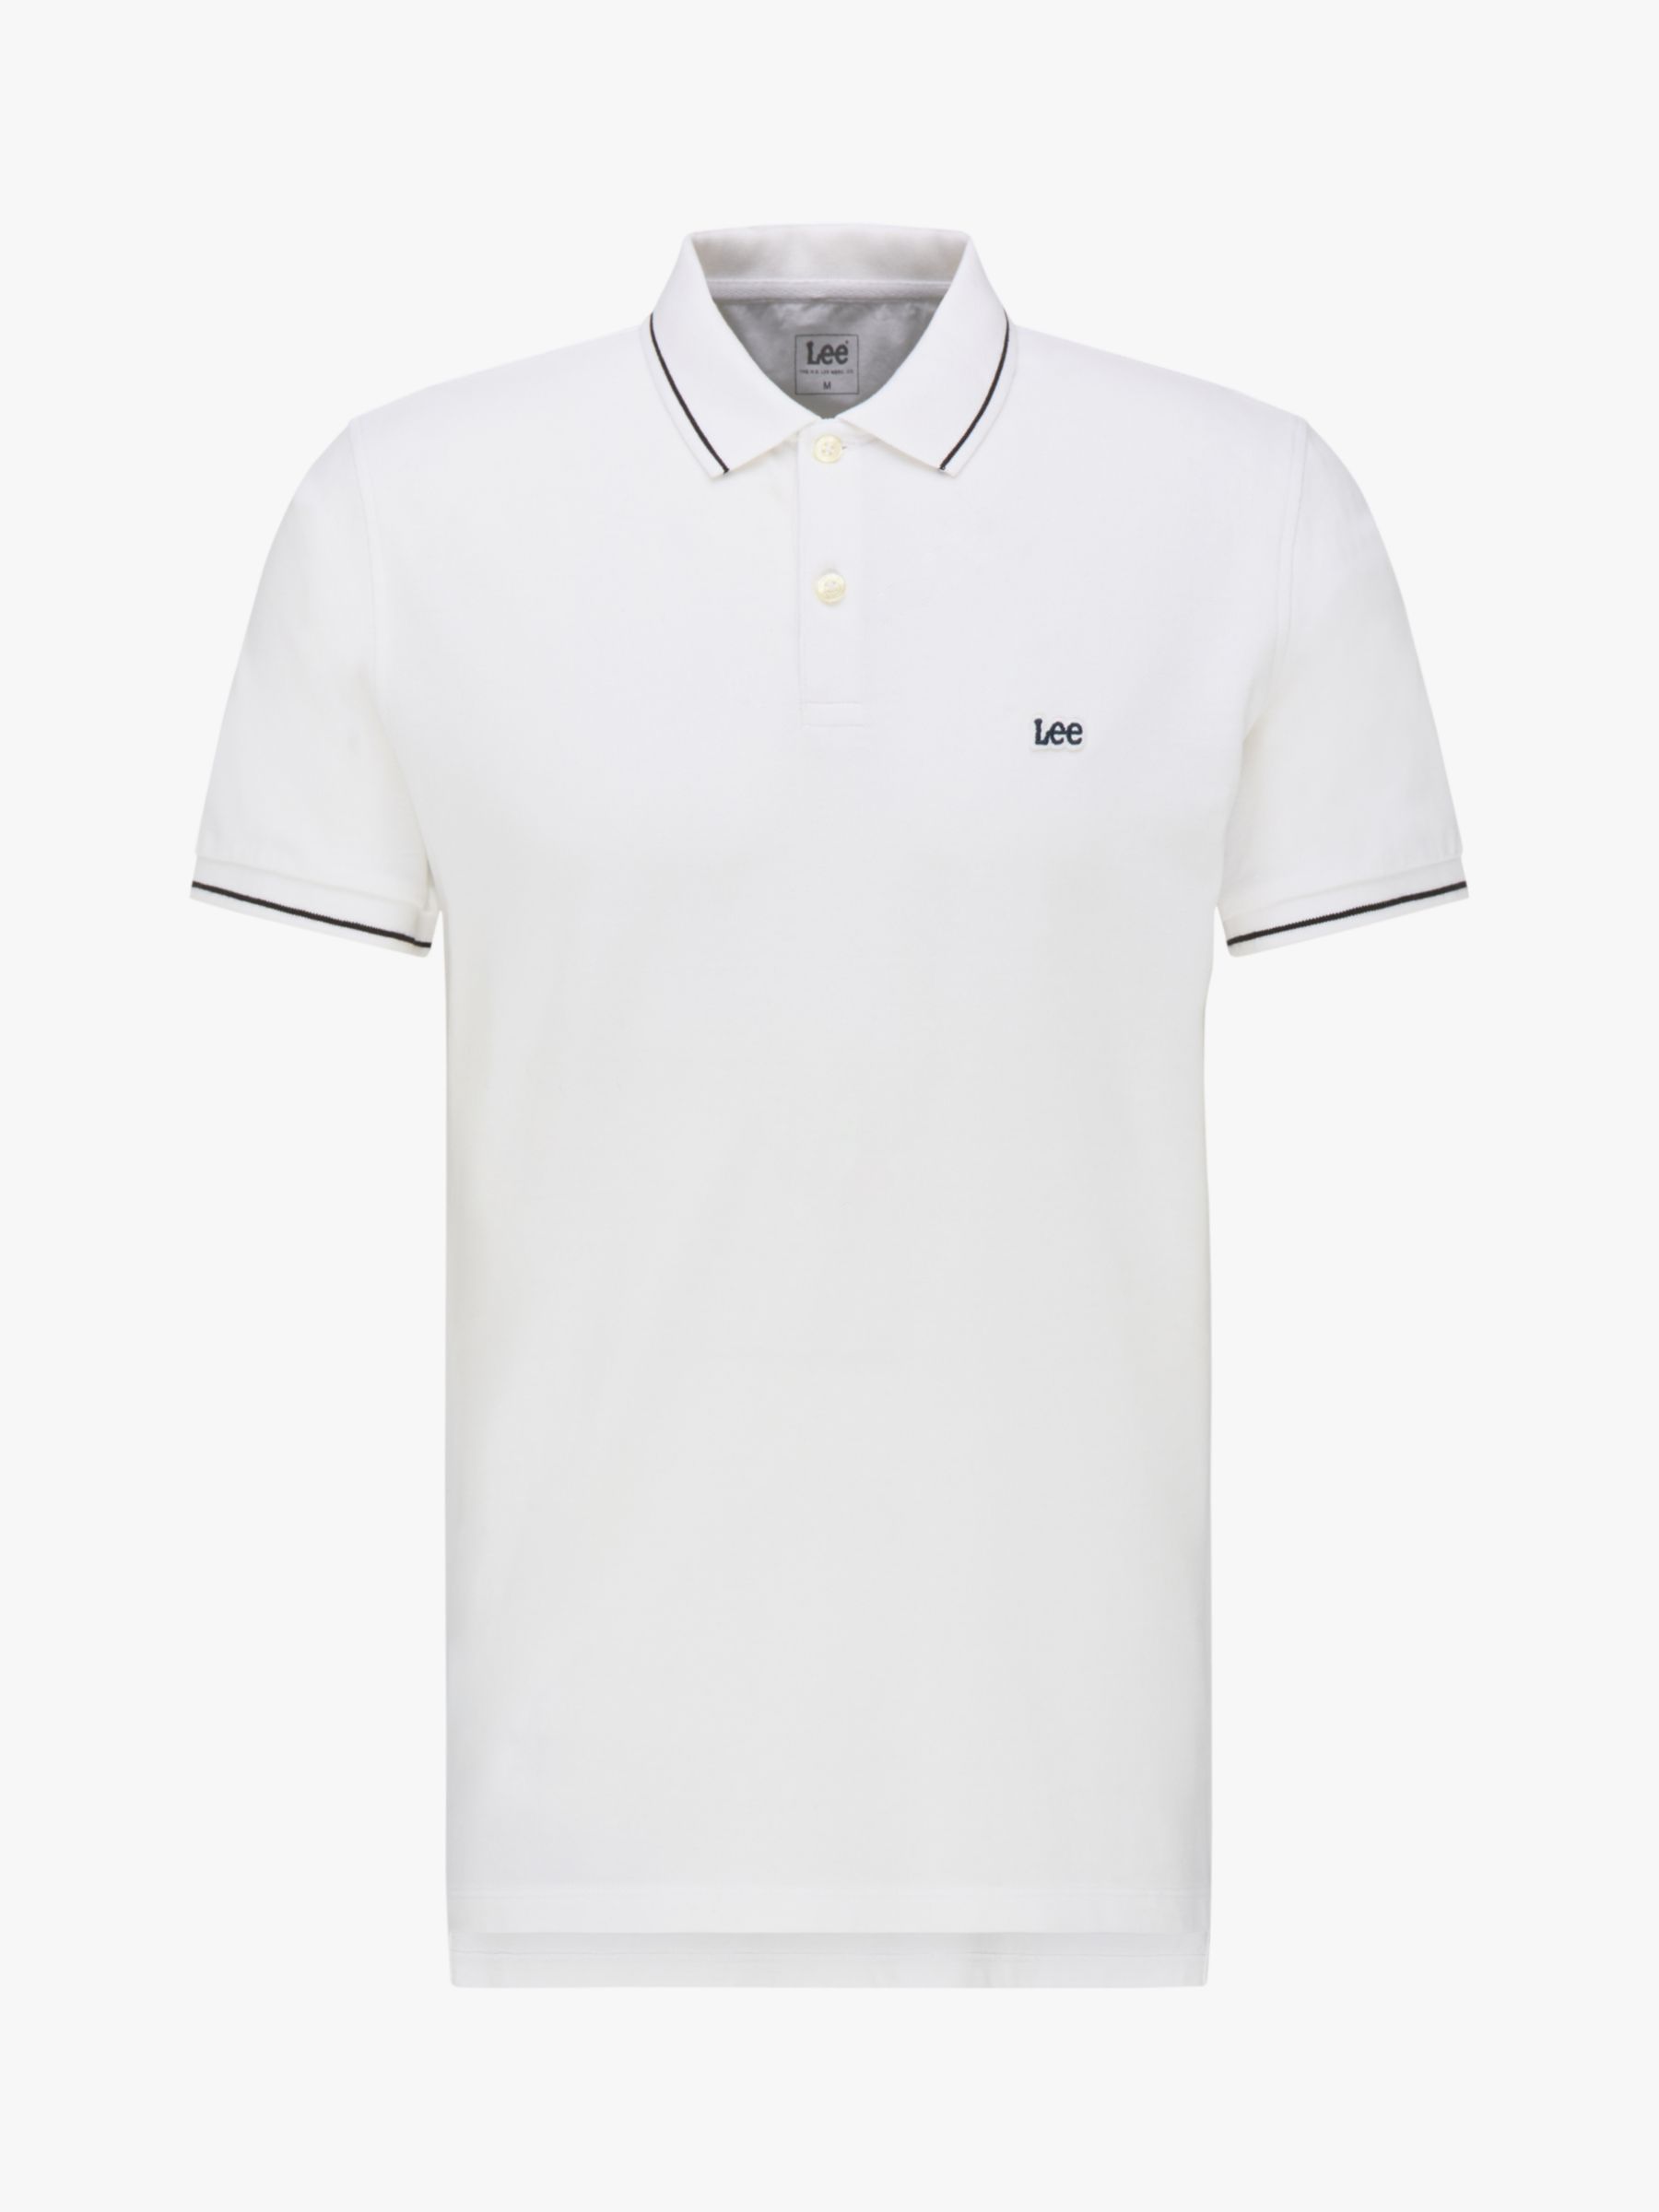 Lee Short Sleeve Polo Top, Bright White, S